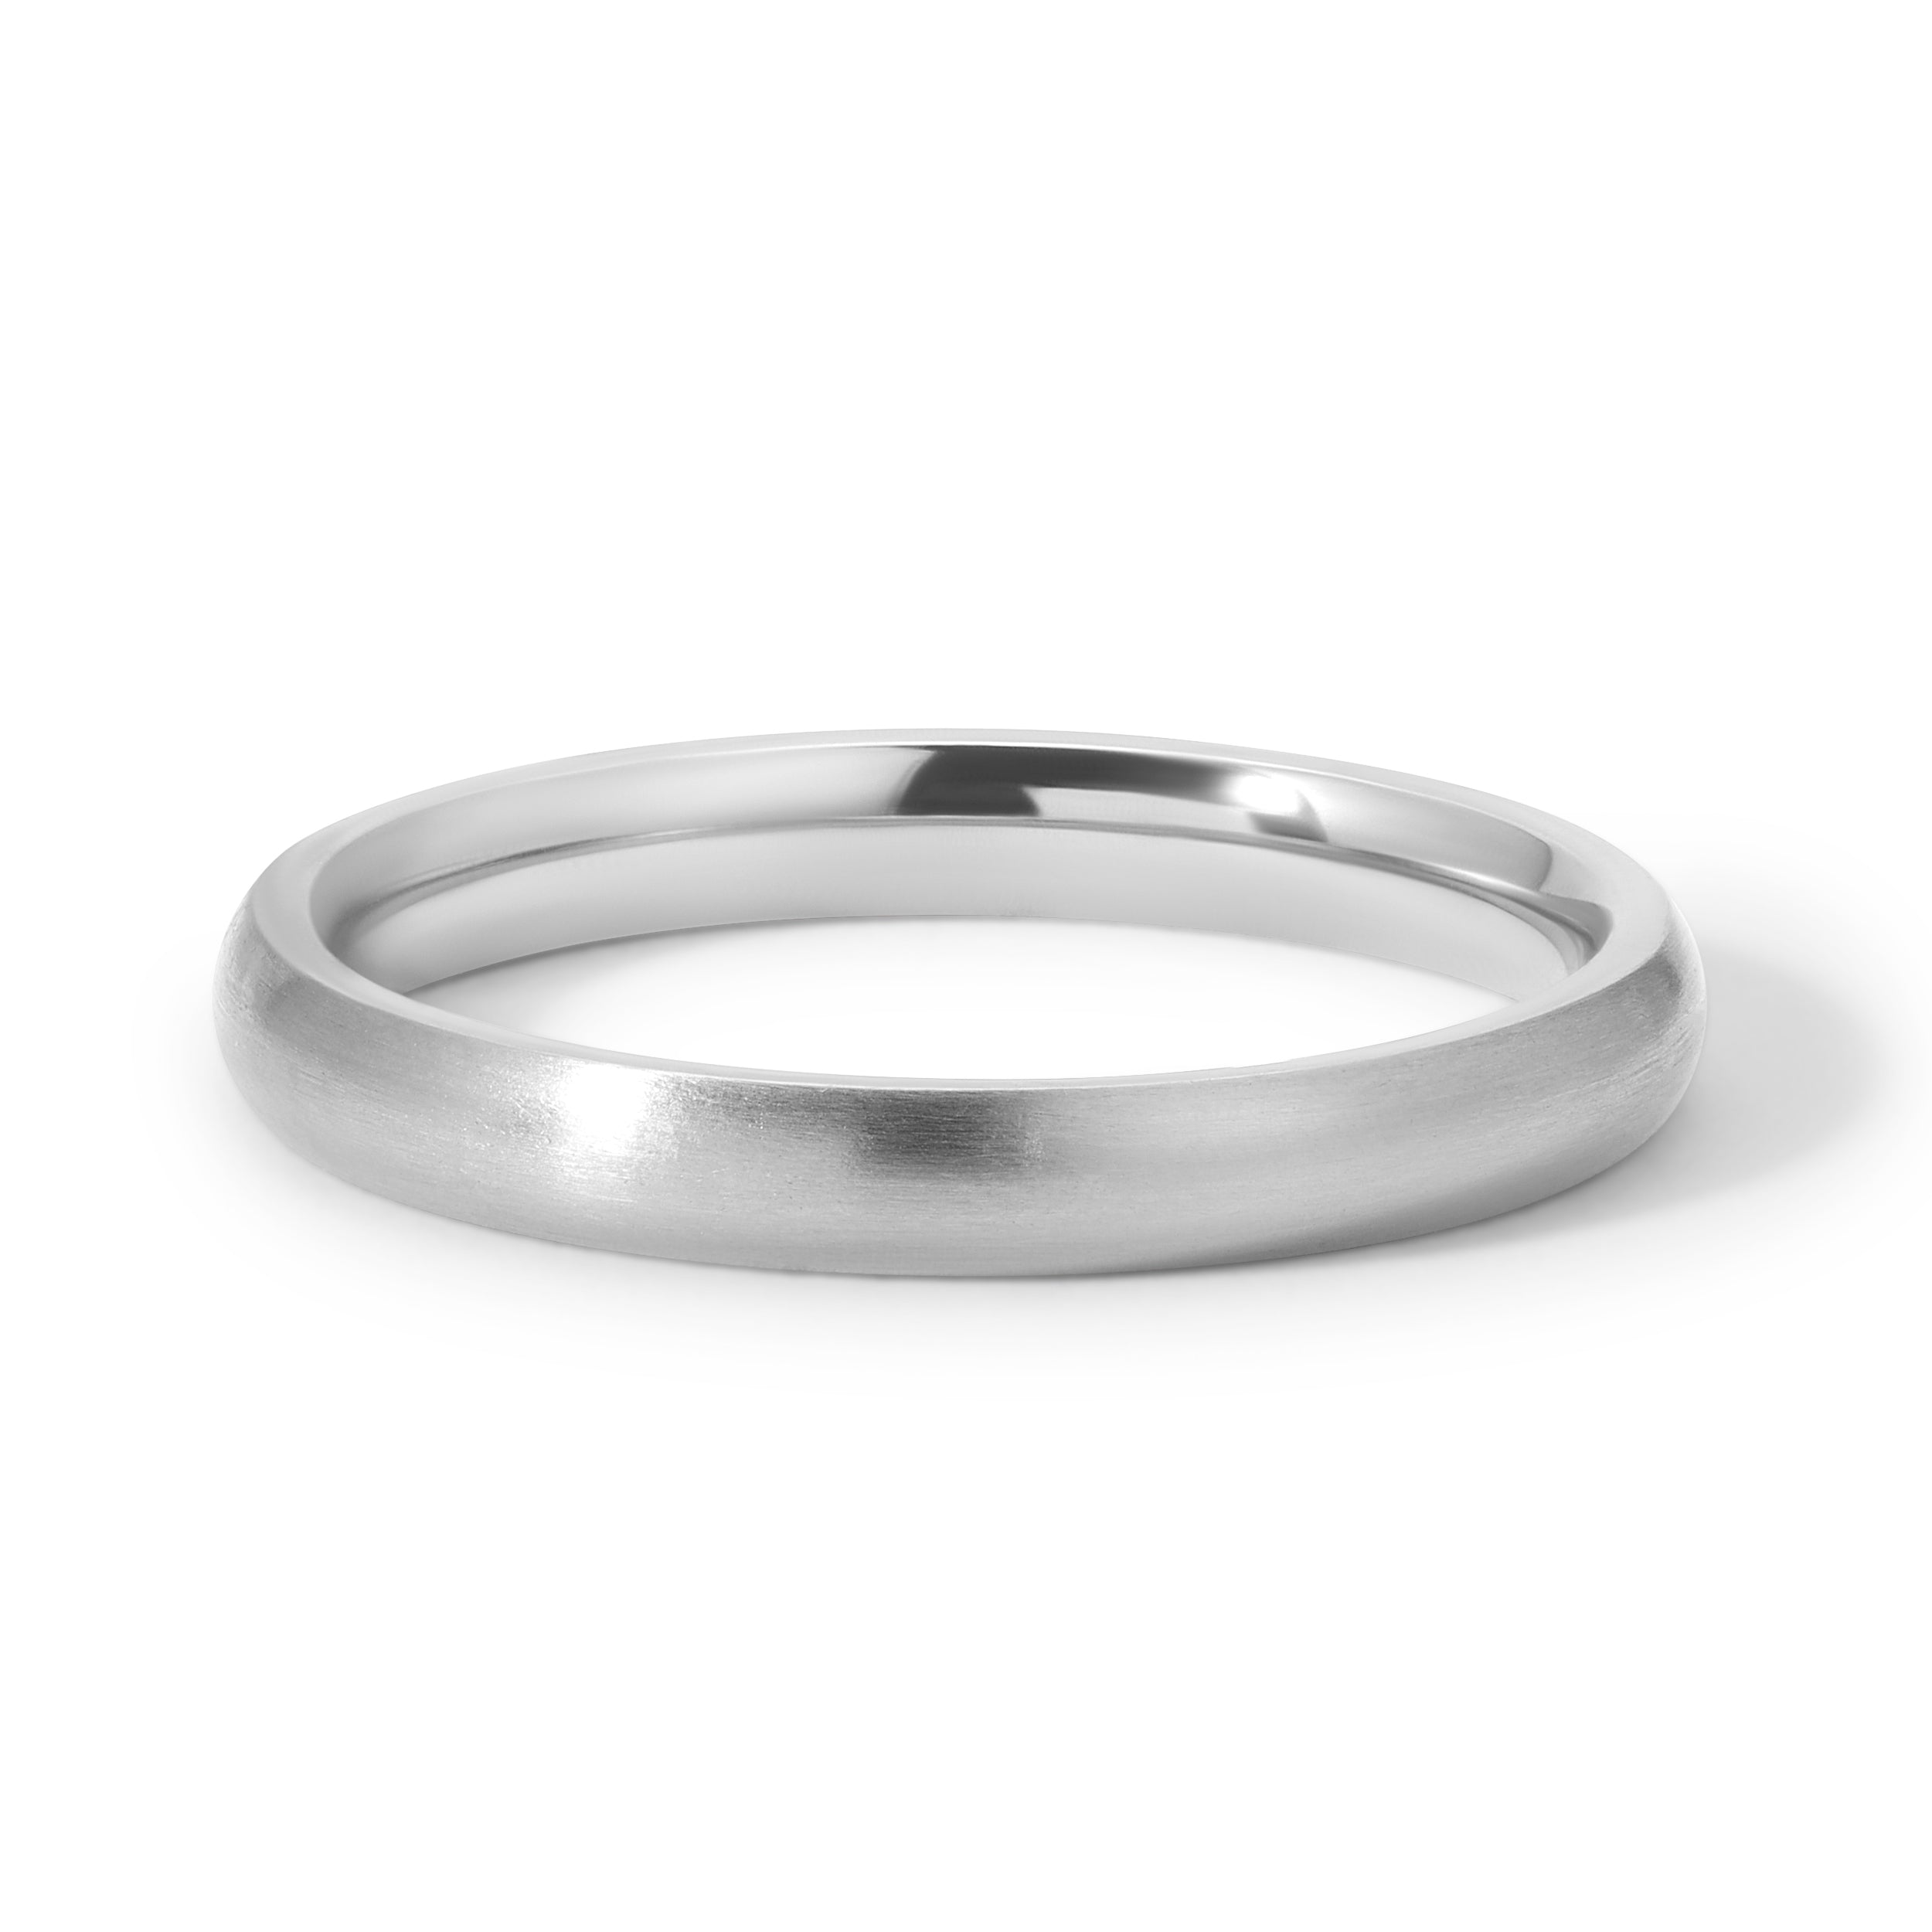 Stainless Steel Plain Rounded Ring